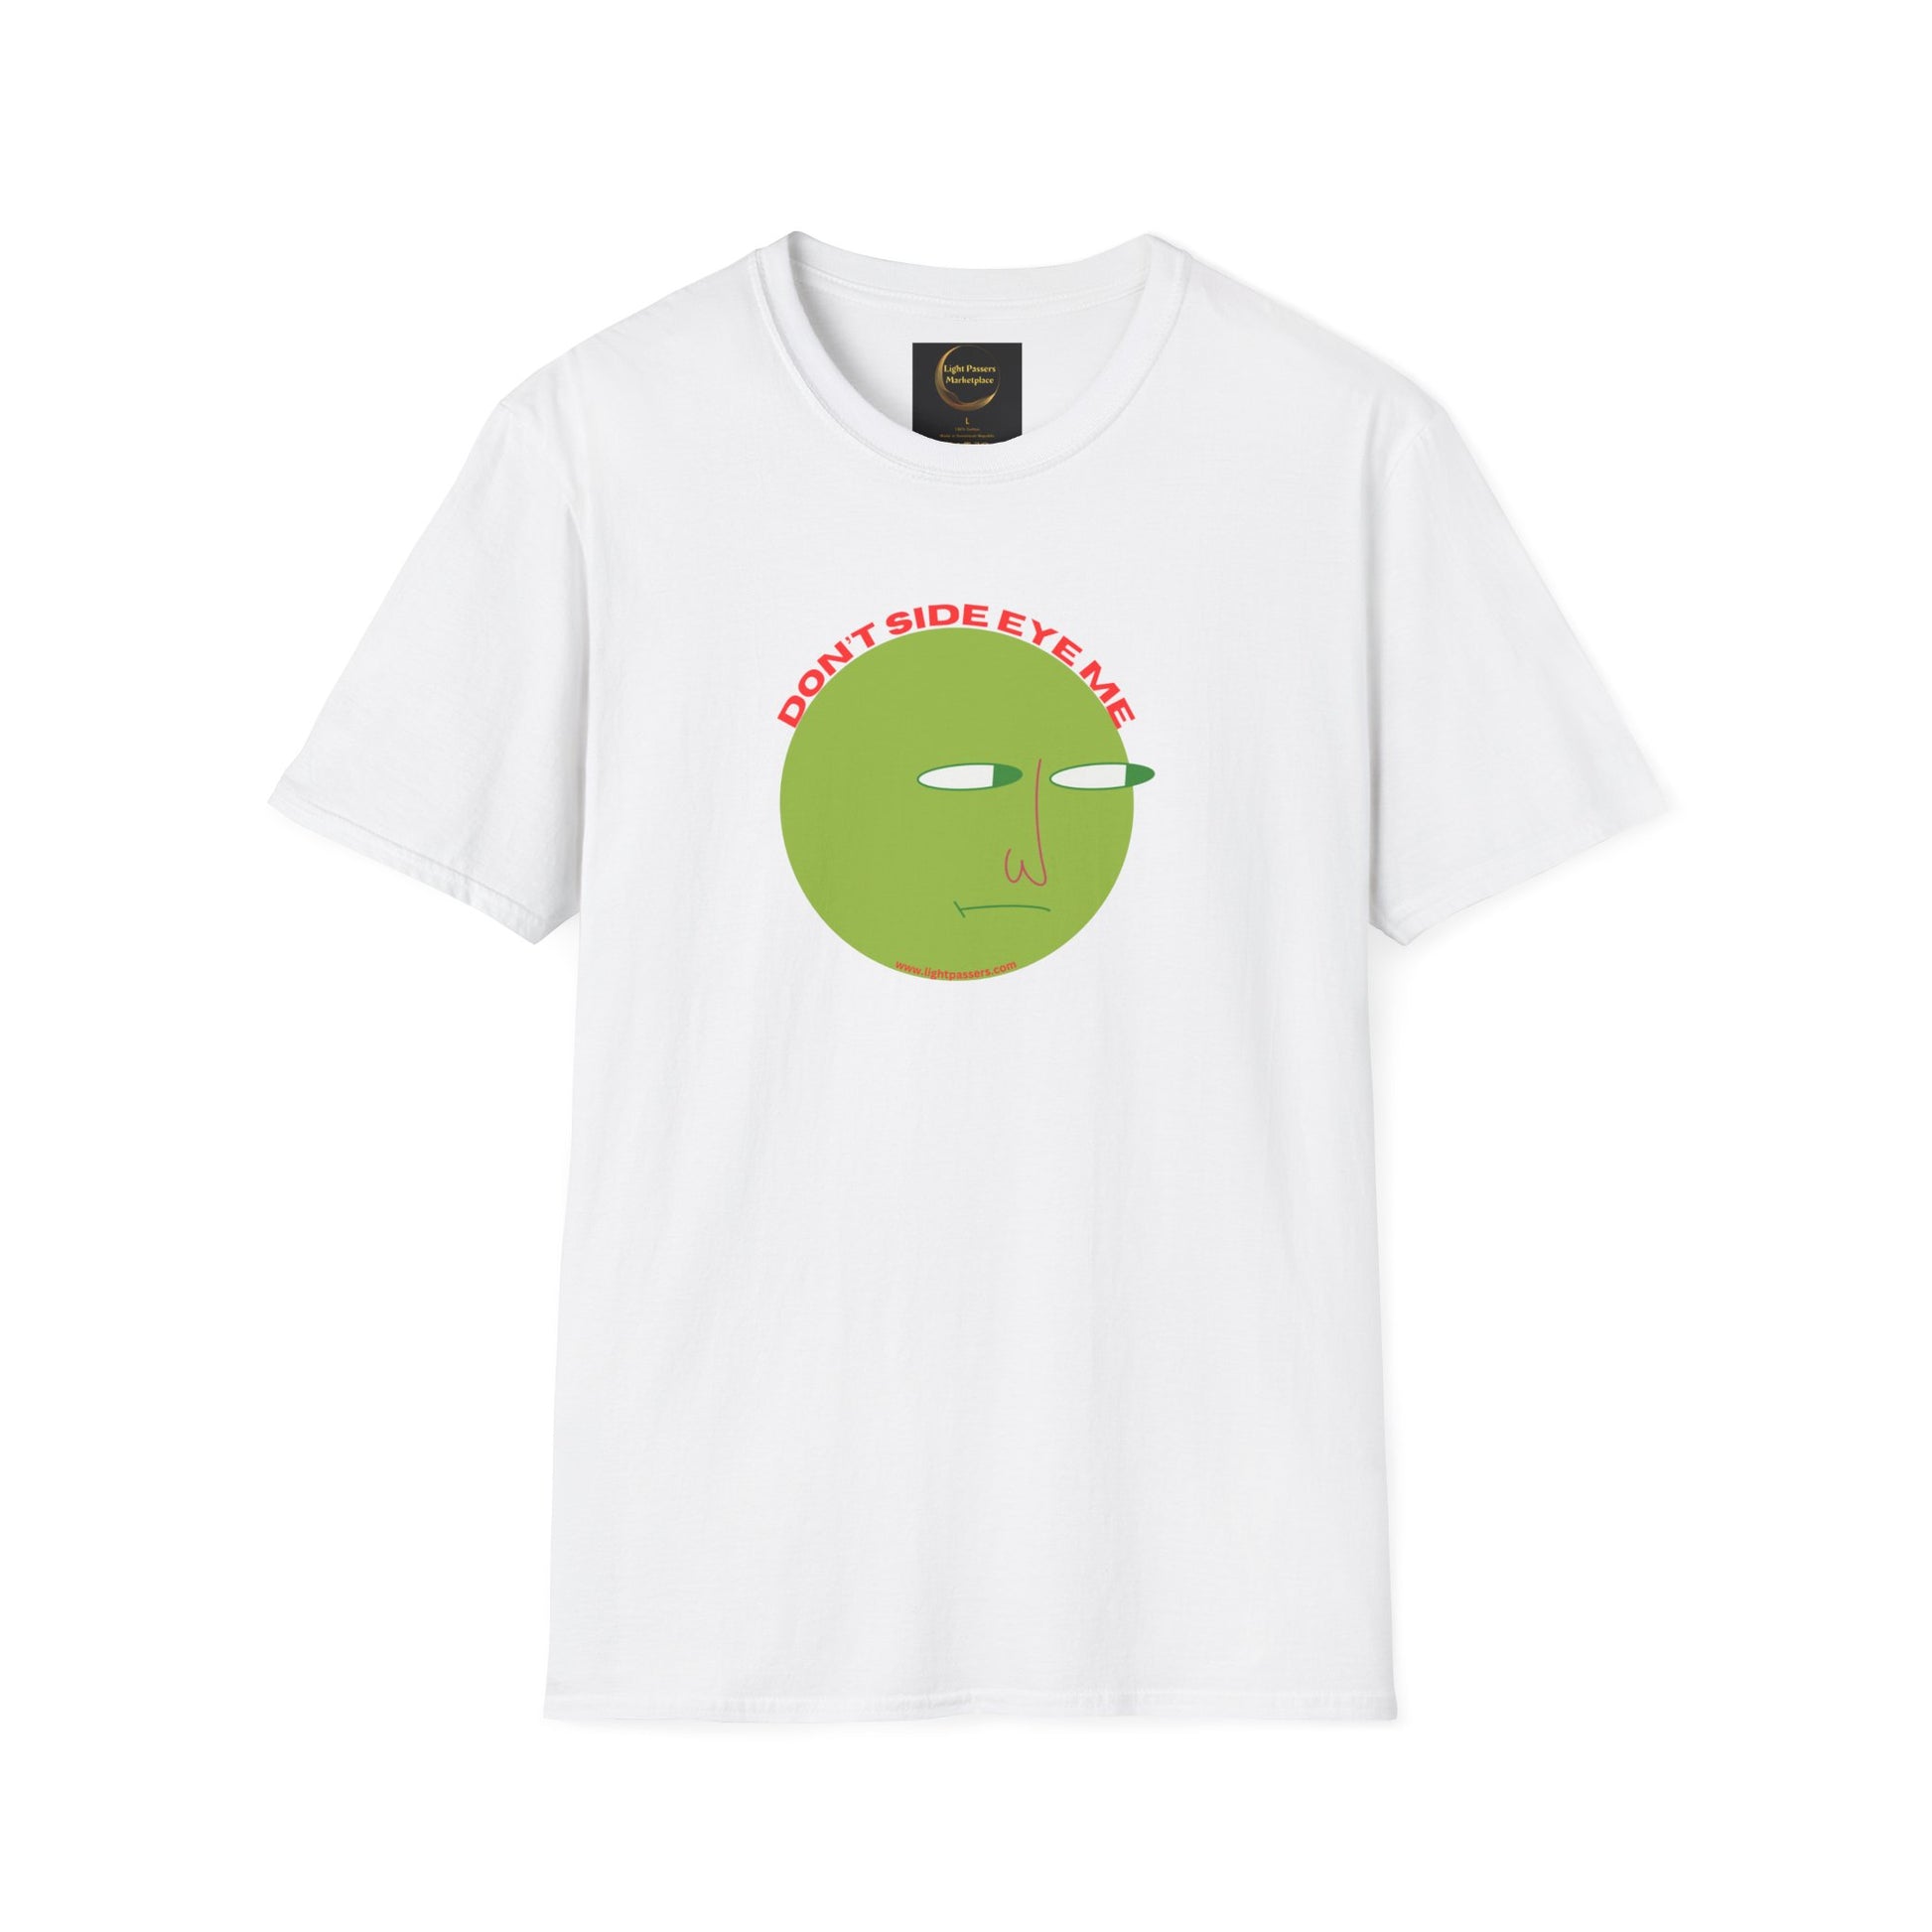 A white unisex t-shirt featuring a green face design, made from soft 100% ring-spun cotton. Ribbed collar, tear-away label, and ethical US cotton construction.